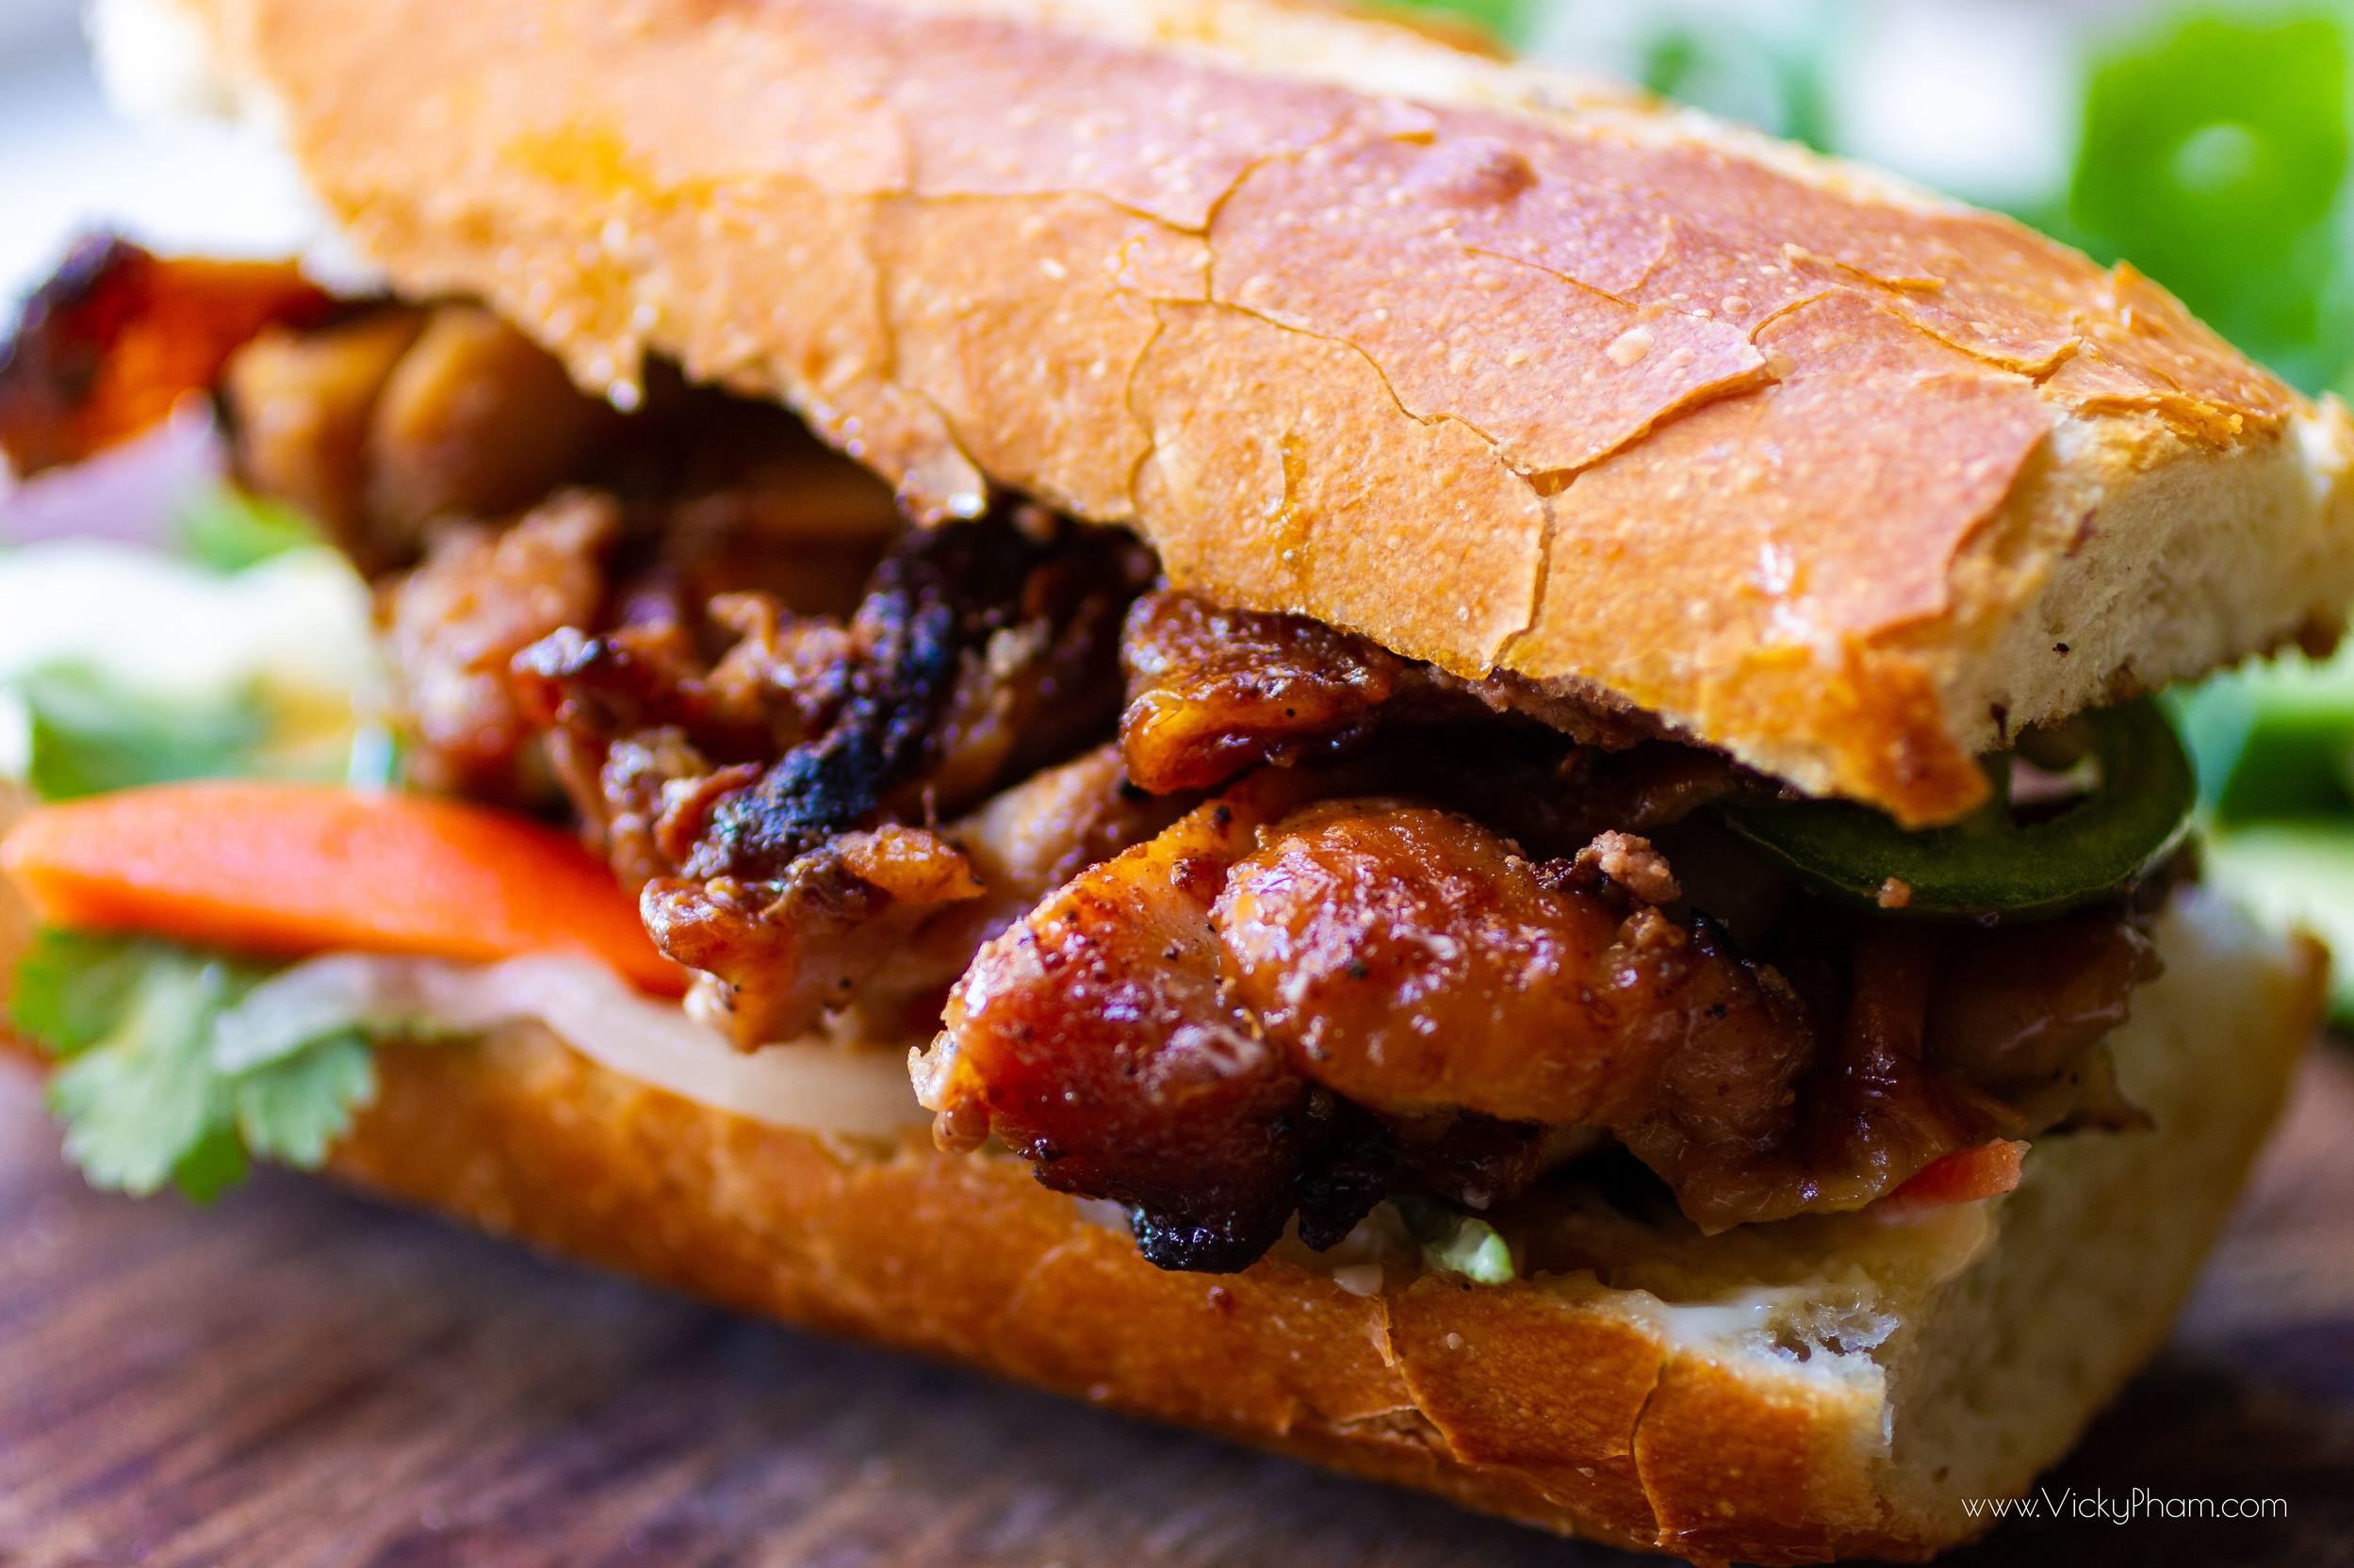  This sandwich may look small, but it's mighty in flavor and satisfaction.